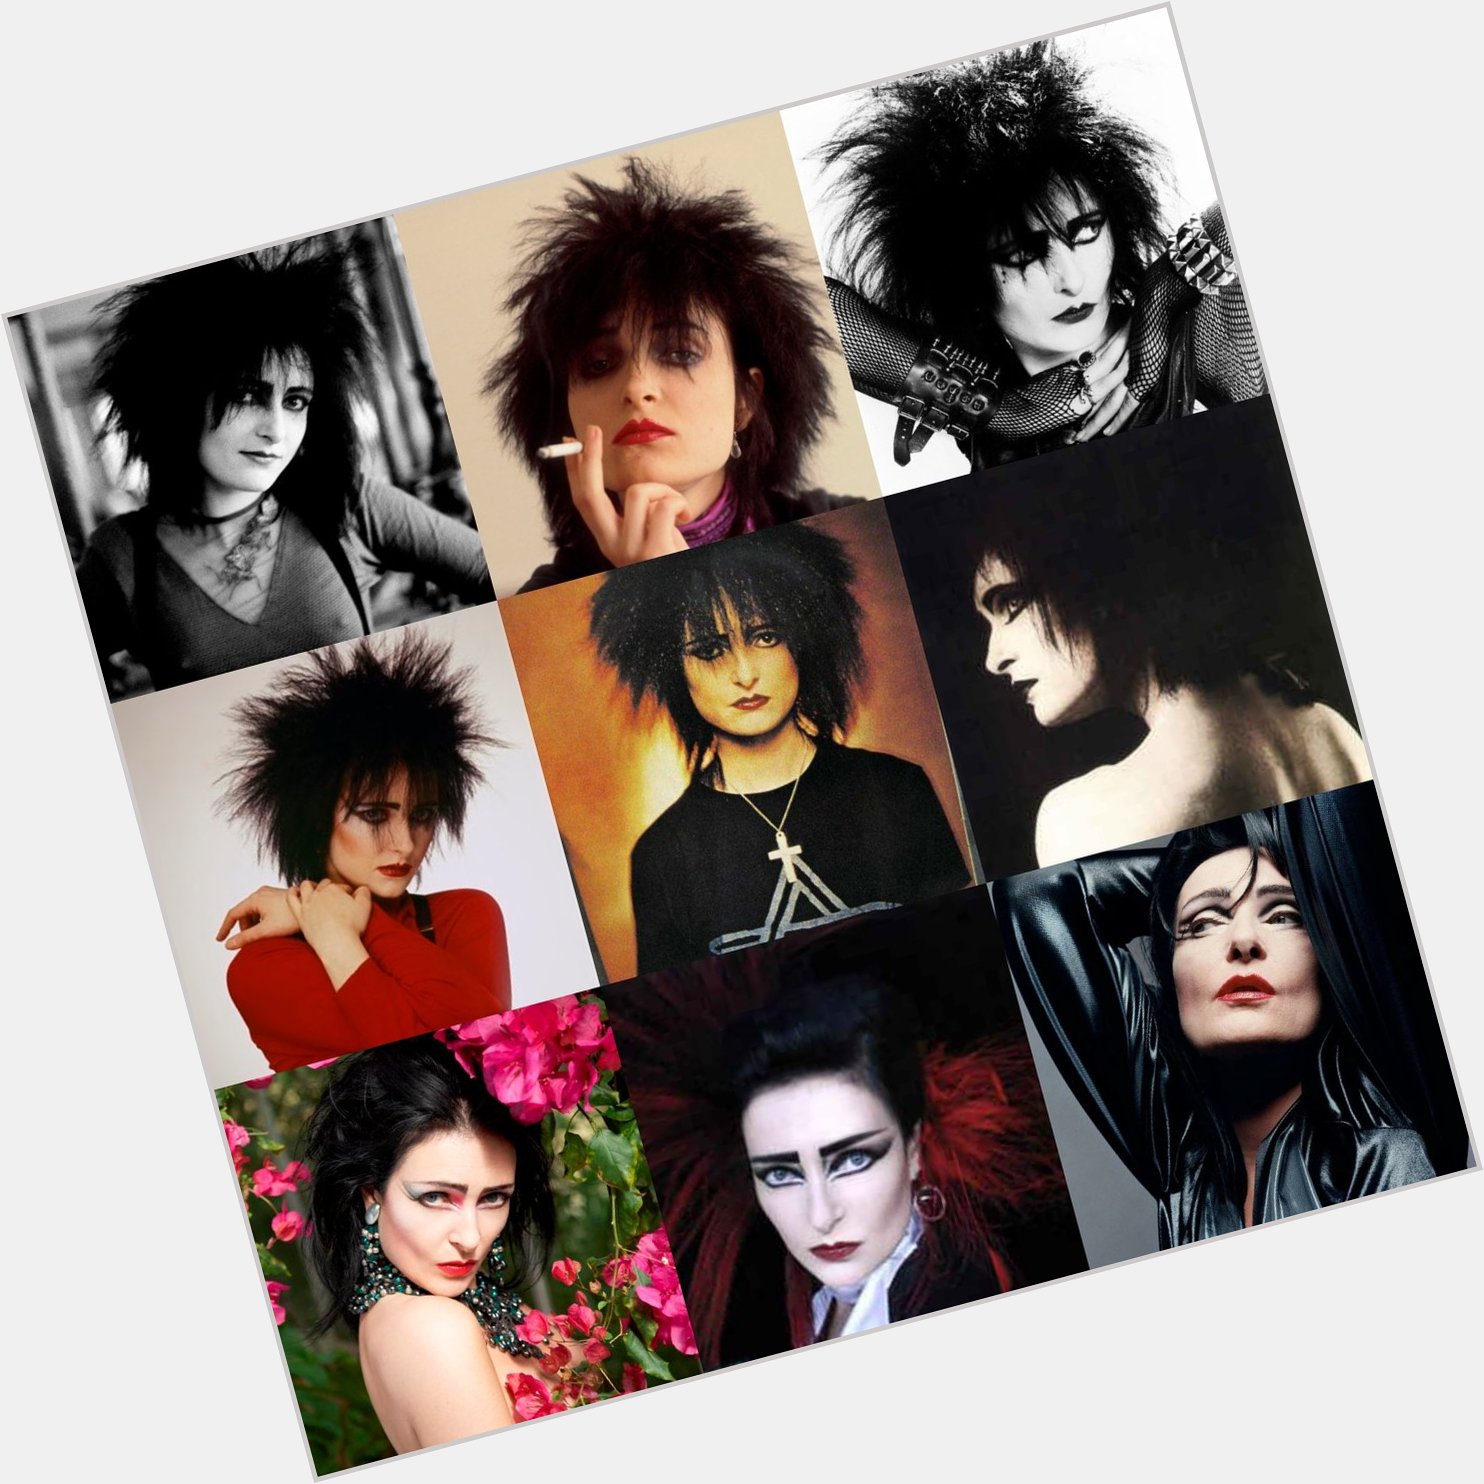 Happy birthday to 
the one, the only 
Siouxsie Sioux
what are your essential
Banshees/Creatures/
Solo tracks..? 